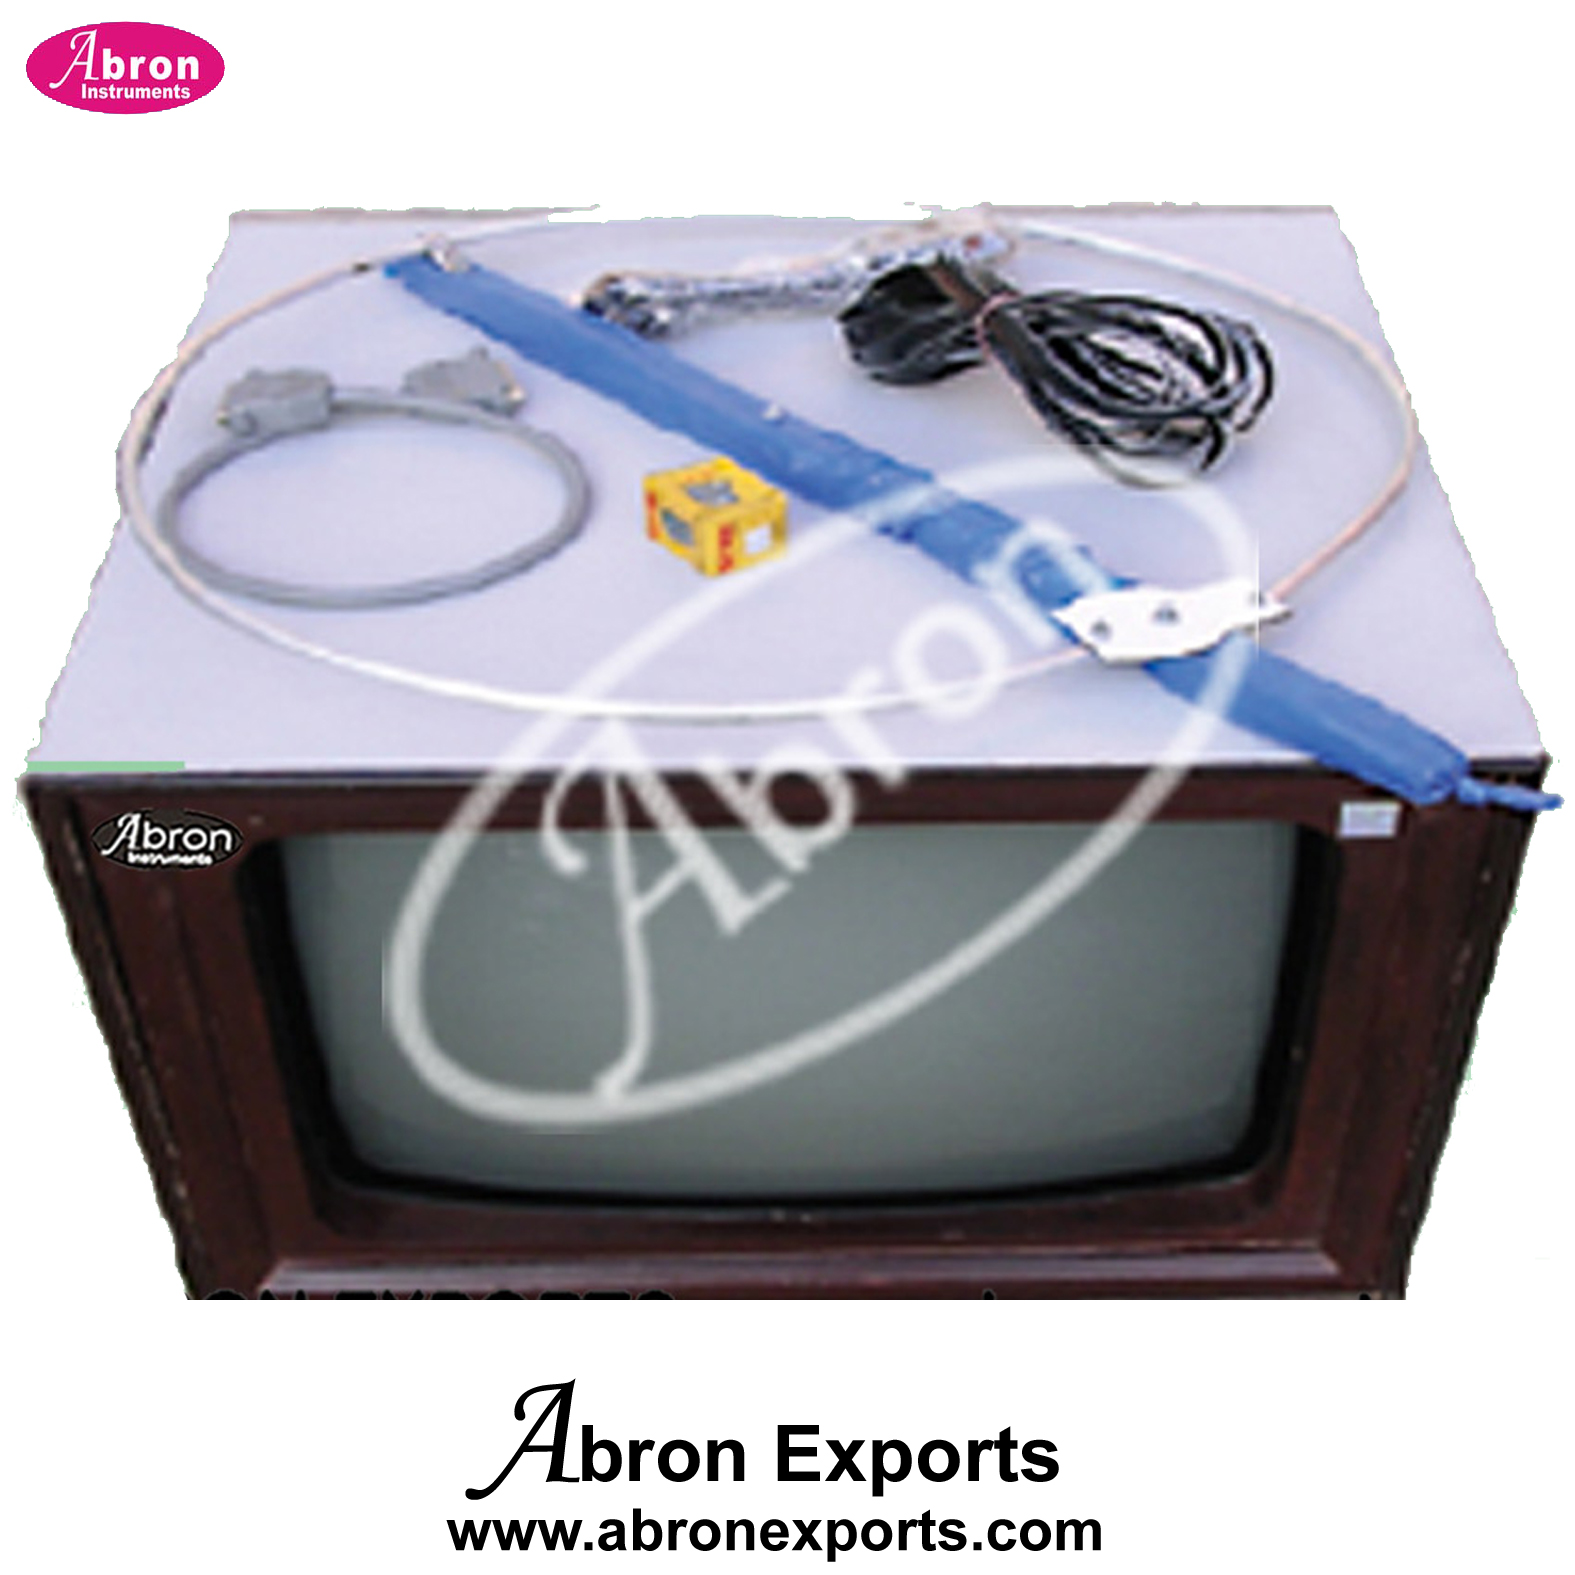 Demonstration TV Colour With Test Pints Trainer For Circuit Board Abron AE-1241C 